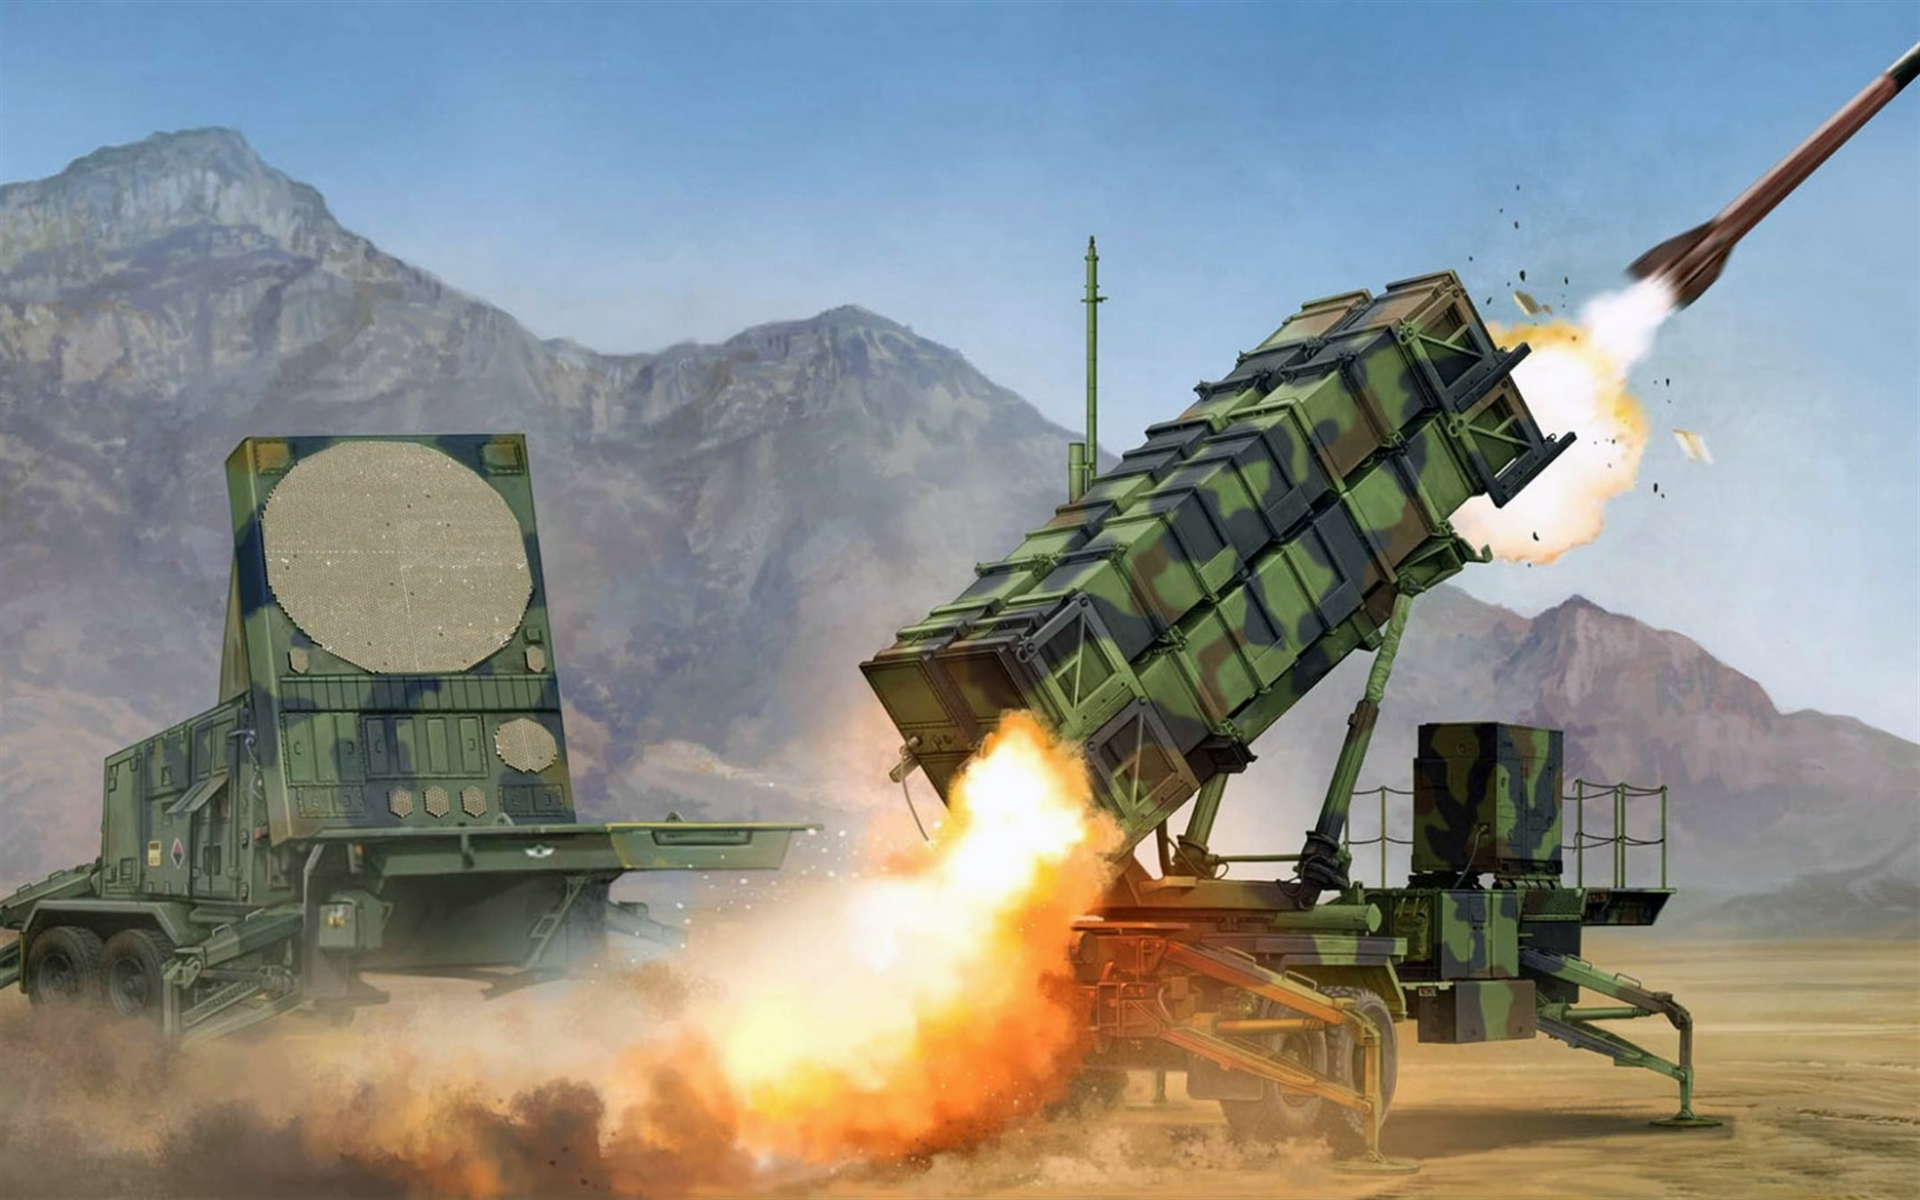 Mim 104 Patriot, Surface To Air Missile System, American - Patriot Missile , HD Wallpaper & Backgrounds